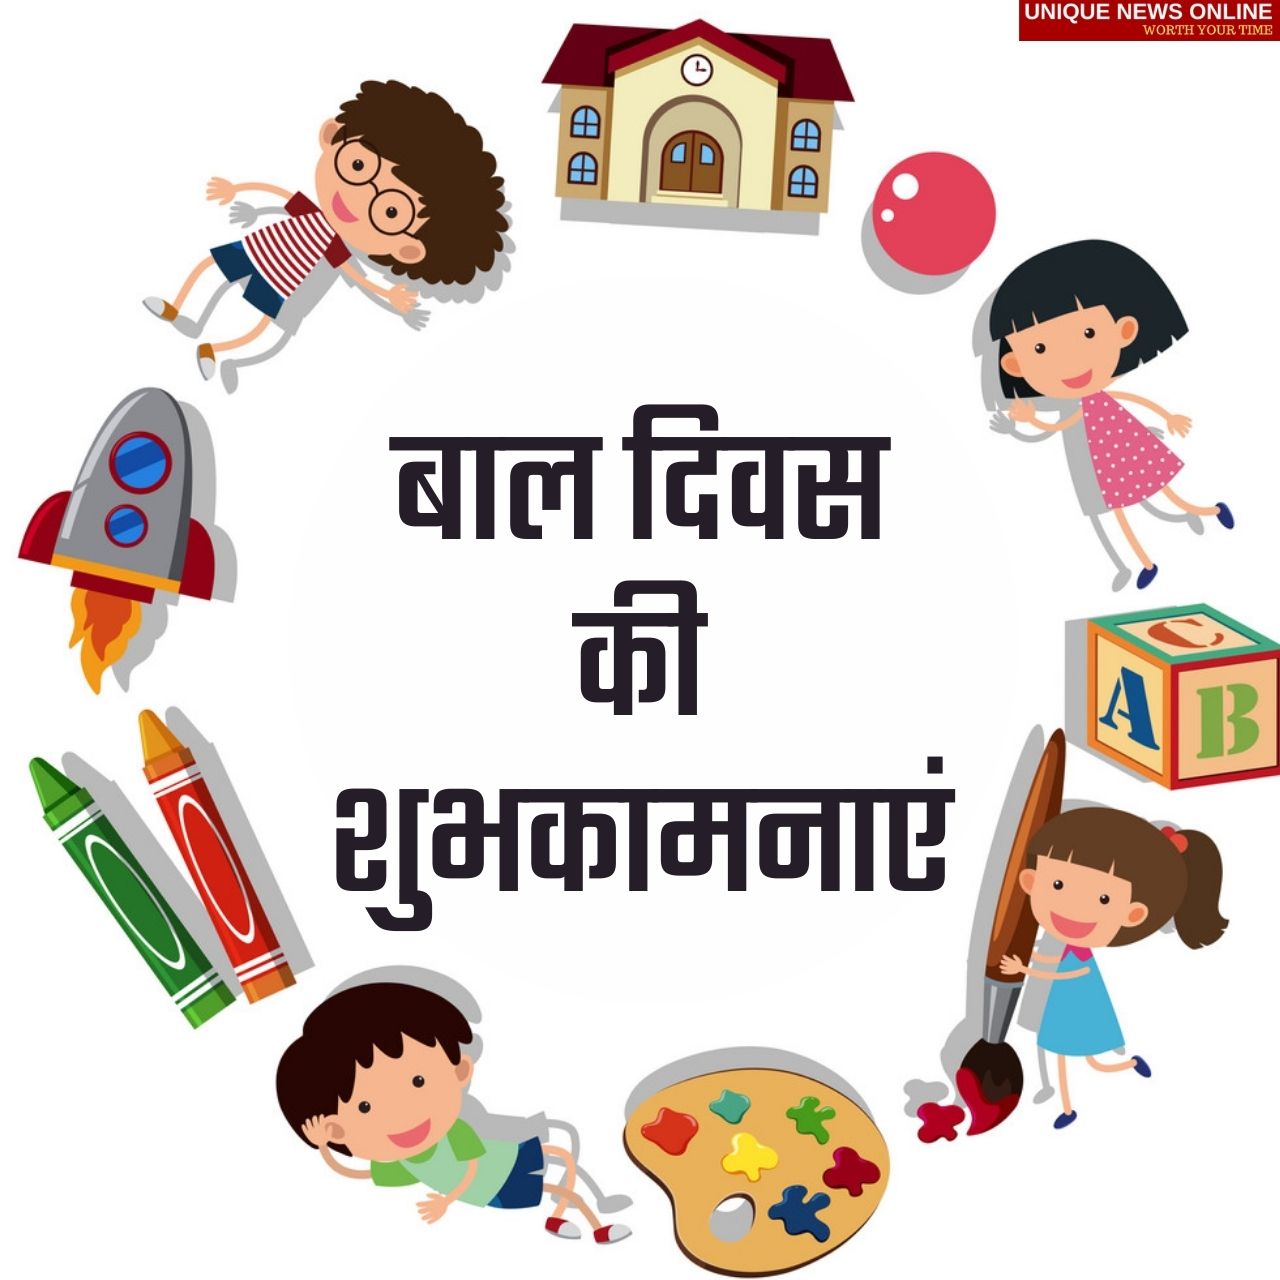 Happy Children's Day 2021 Hindi Wishes, Quotes, Shayari, Status, HD Images, and Messages